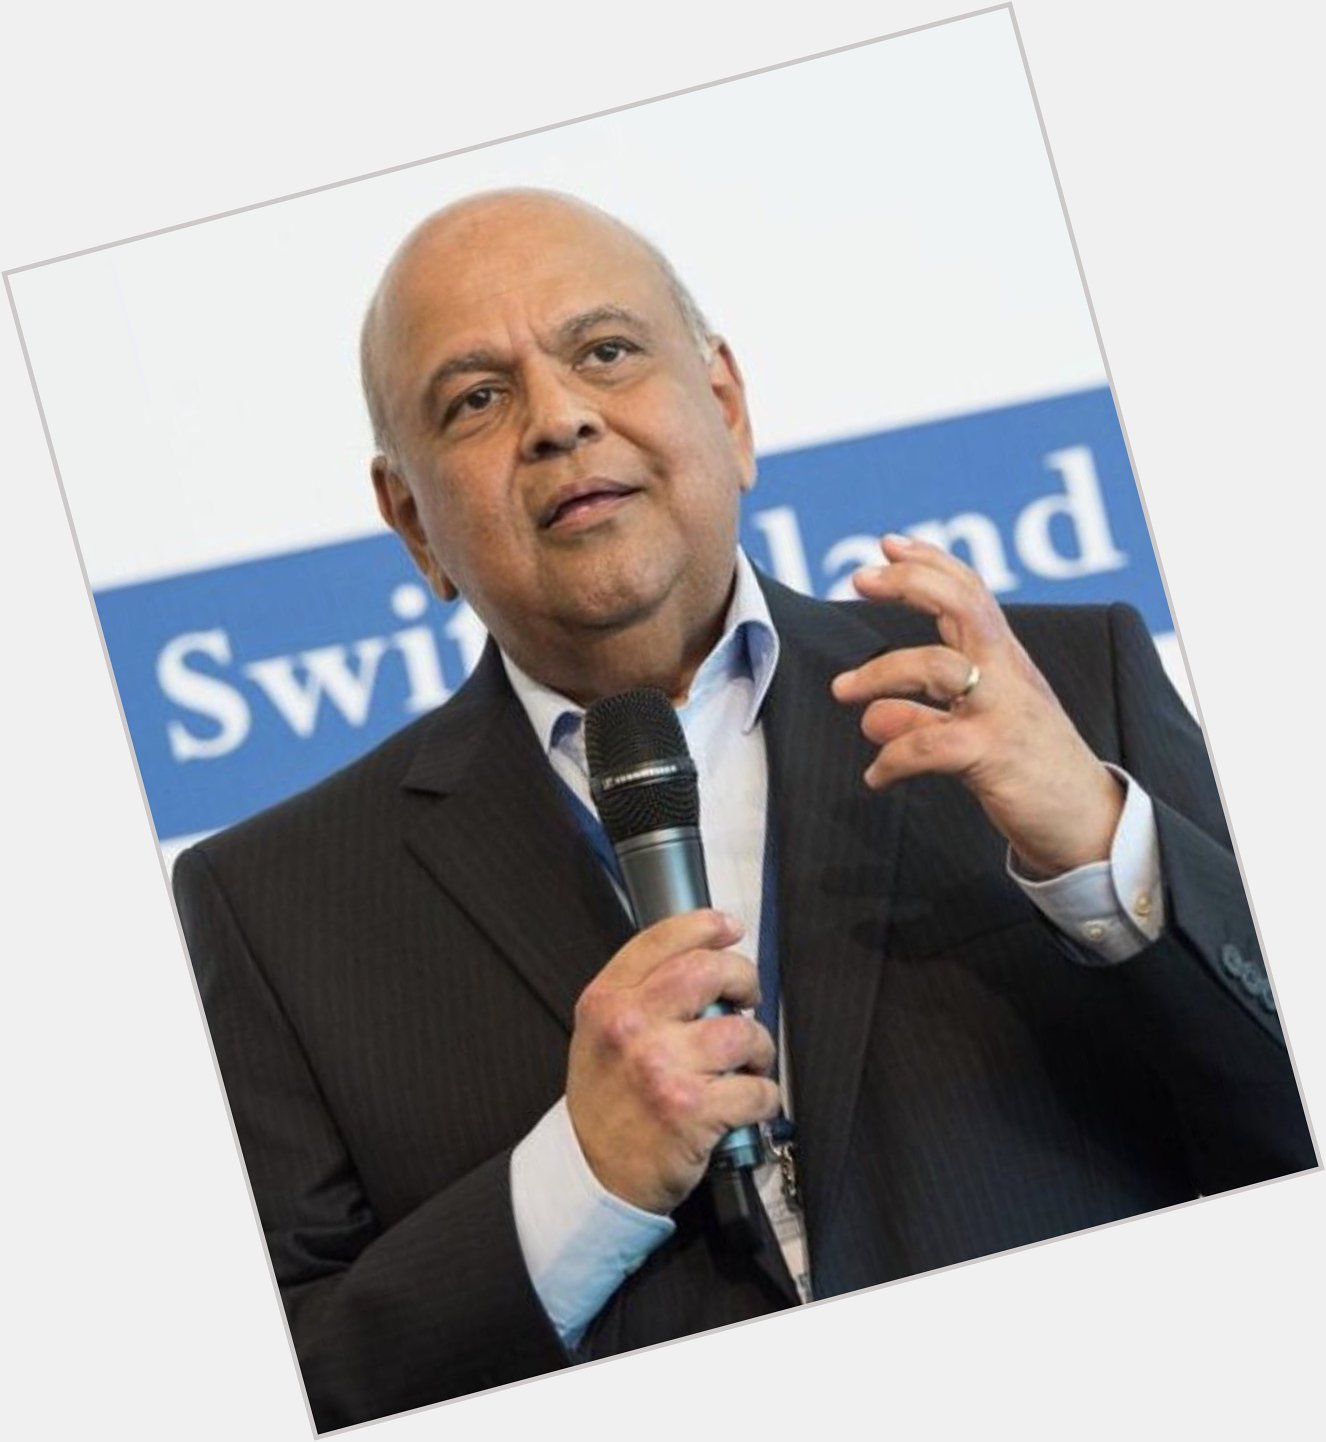 Happy 69 birthday Minister Pravin Gordhan. May your purge axe grew sharper with each day that passes. 